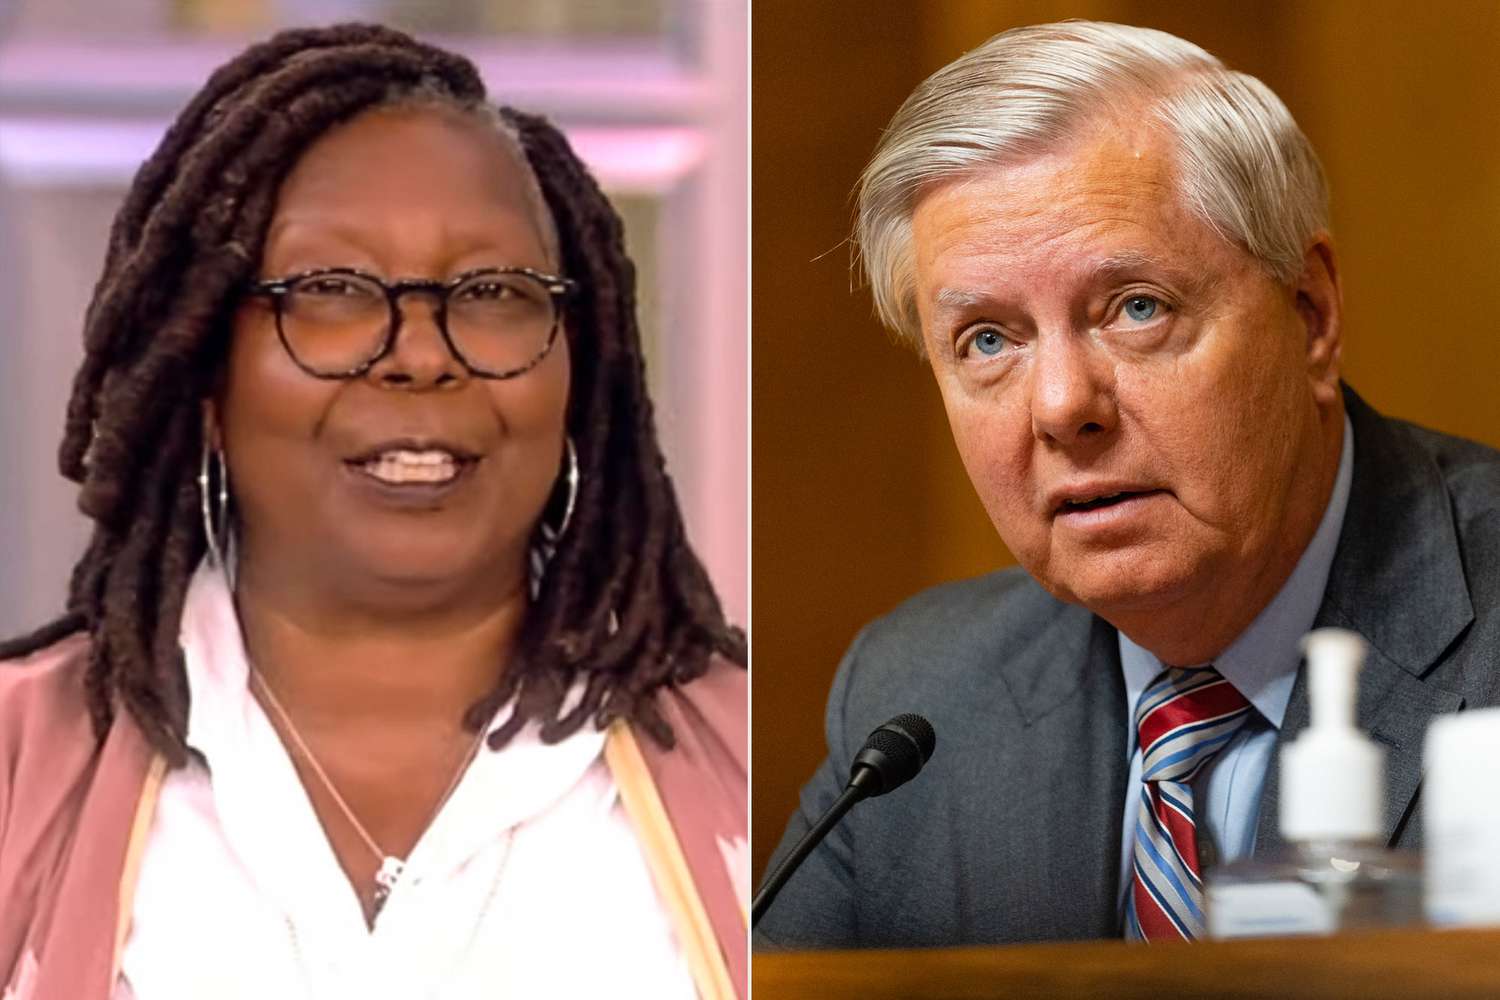 Whoopi Goldberg addresses 'conversation' over her Lindsey Graham gay joke on The View : 'It was a joke, guys' - Yahoo Entertainment